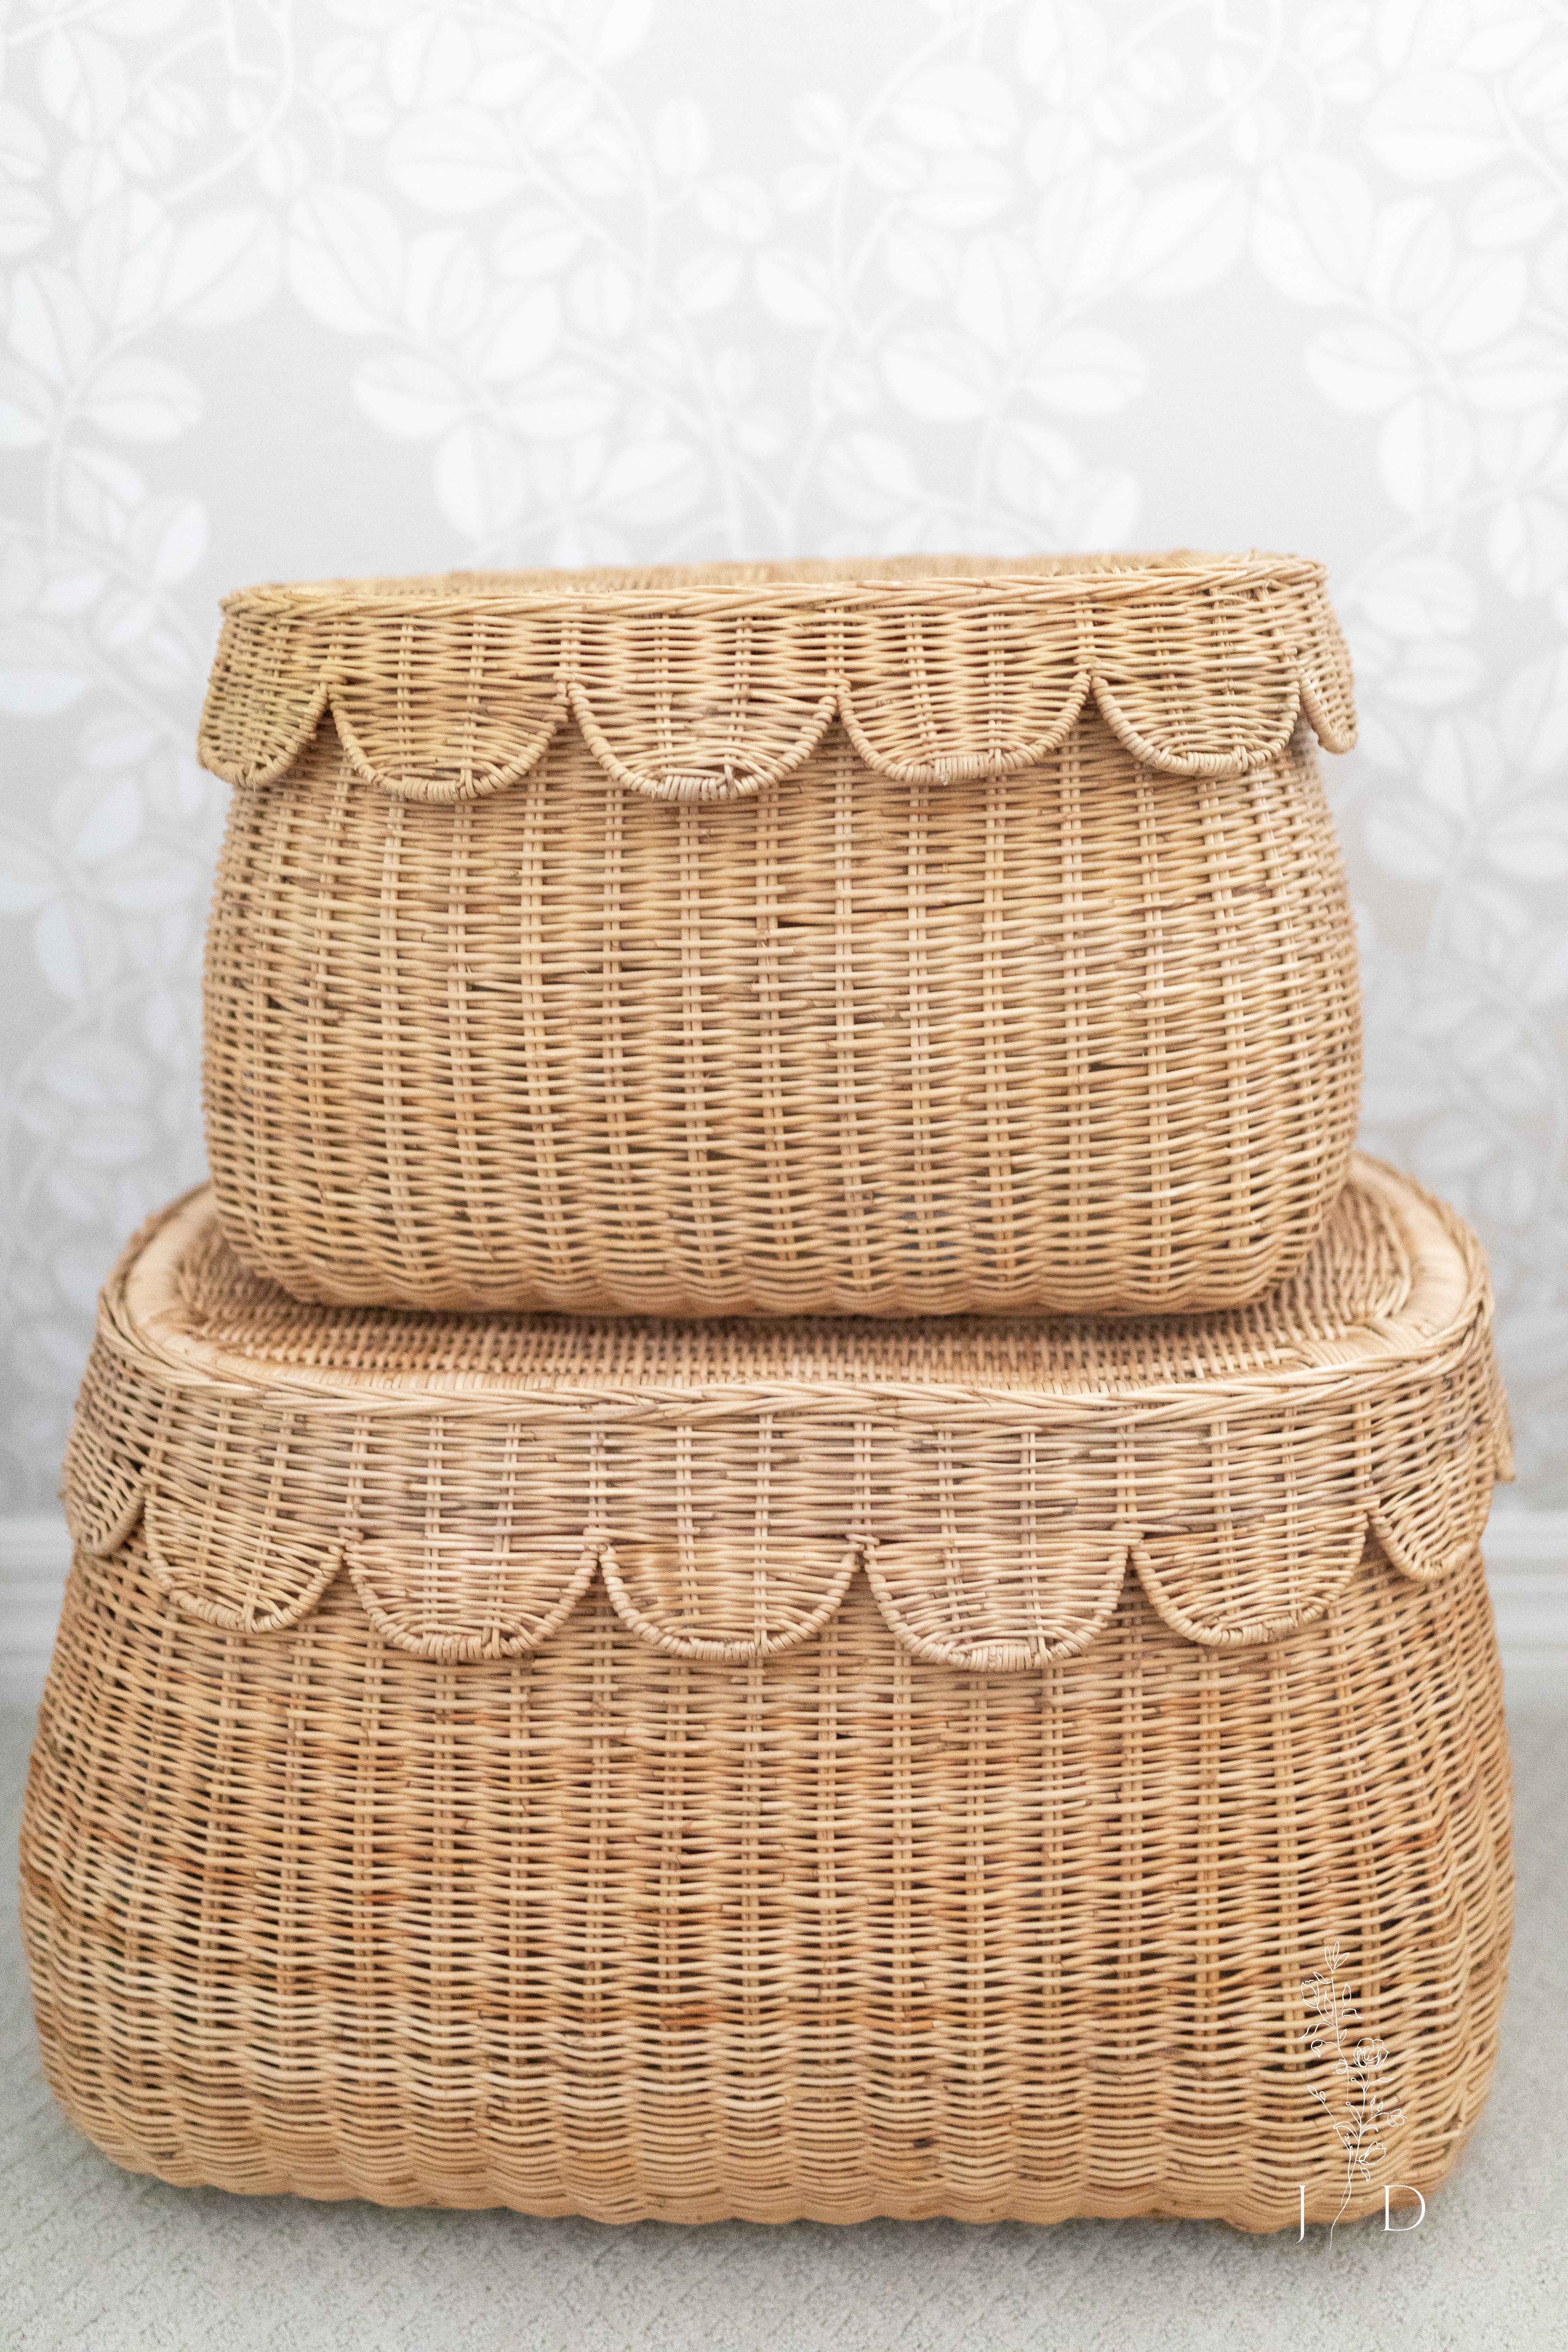 Serena and Lily's Best Products Scallop Baskets 